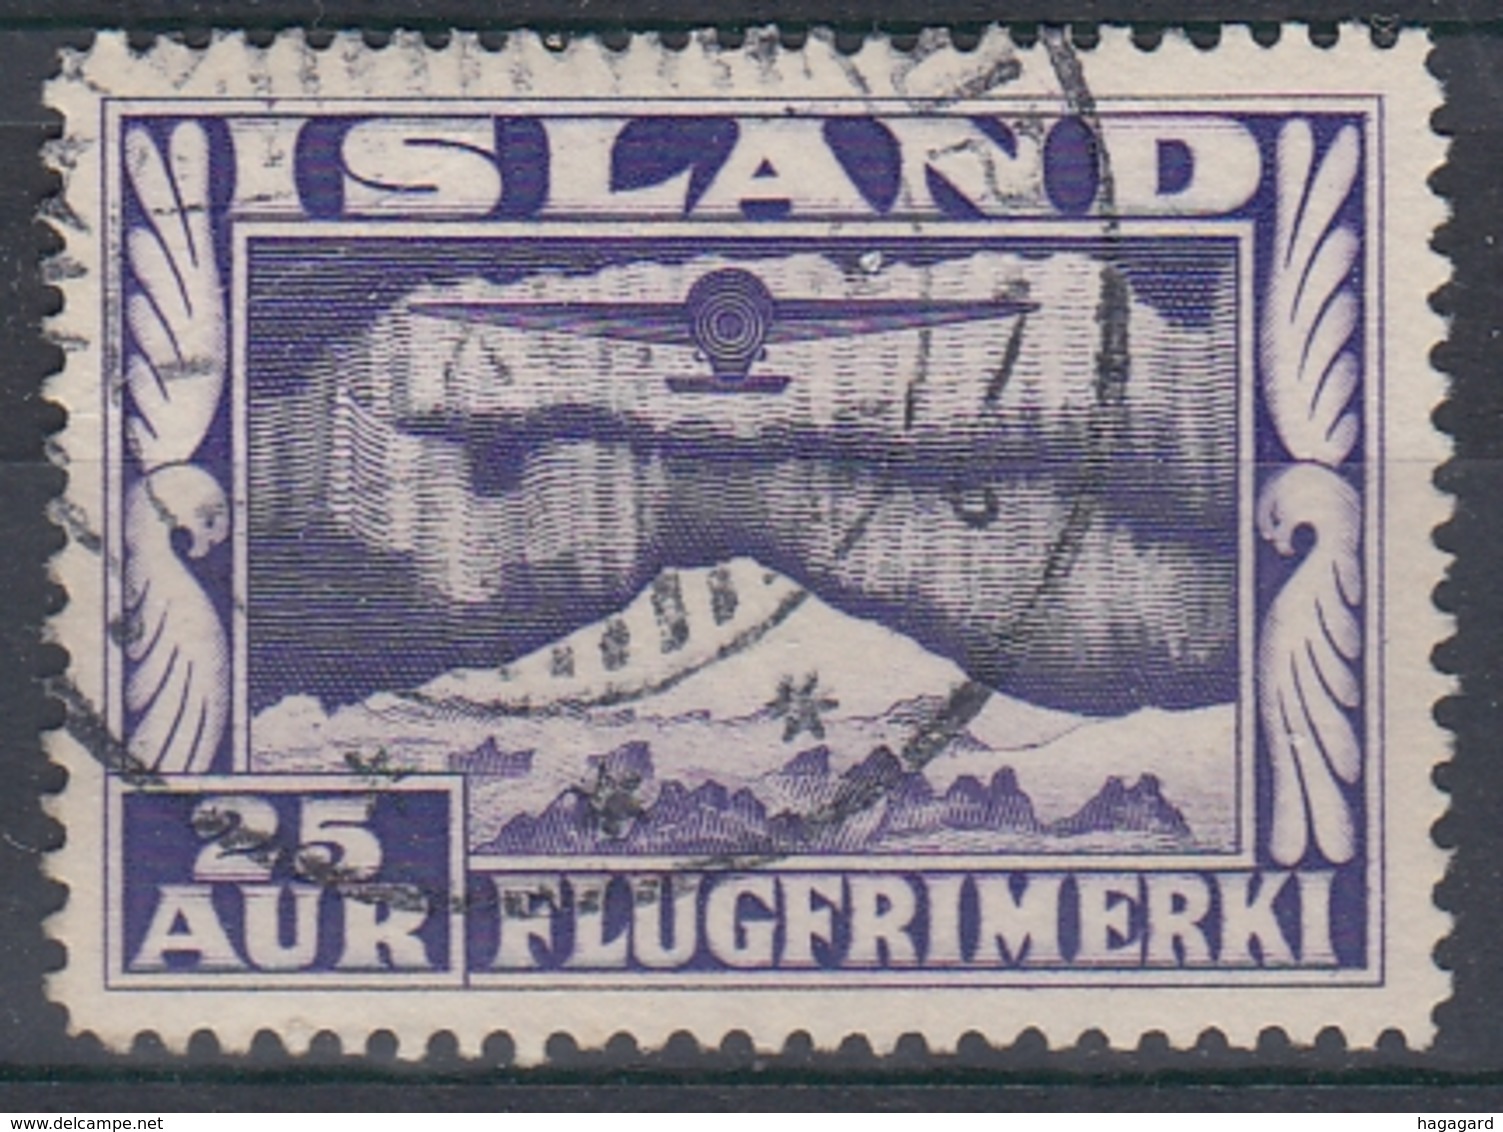 +M312. Iceland 1934. Airmail. Michel 177A. Used - Luchtpost